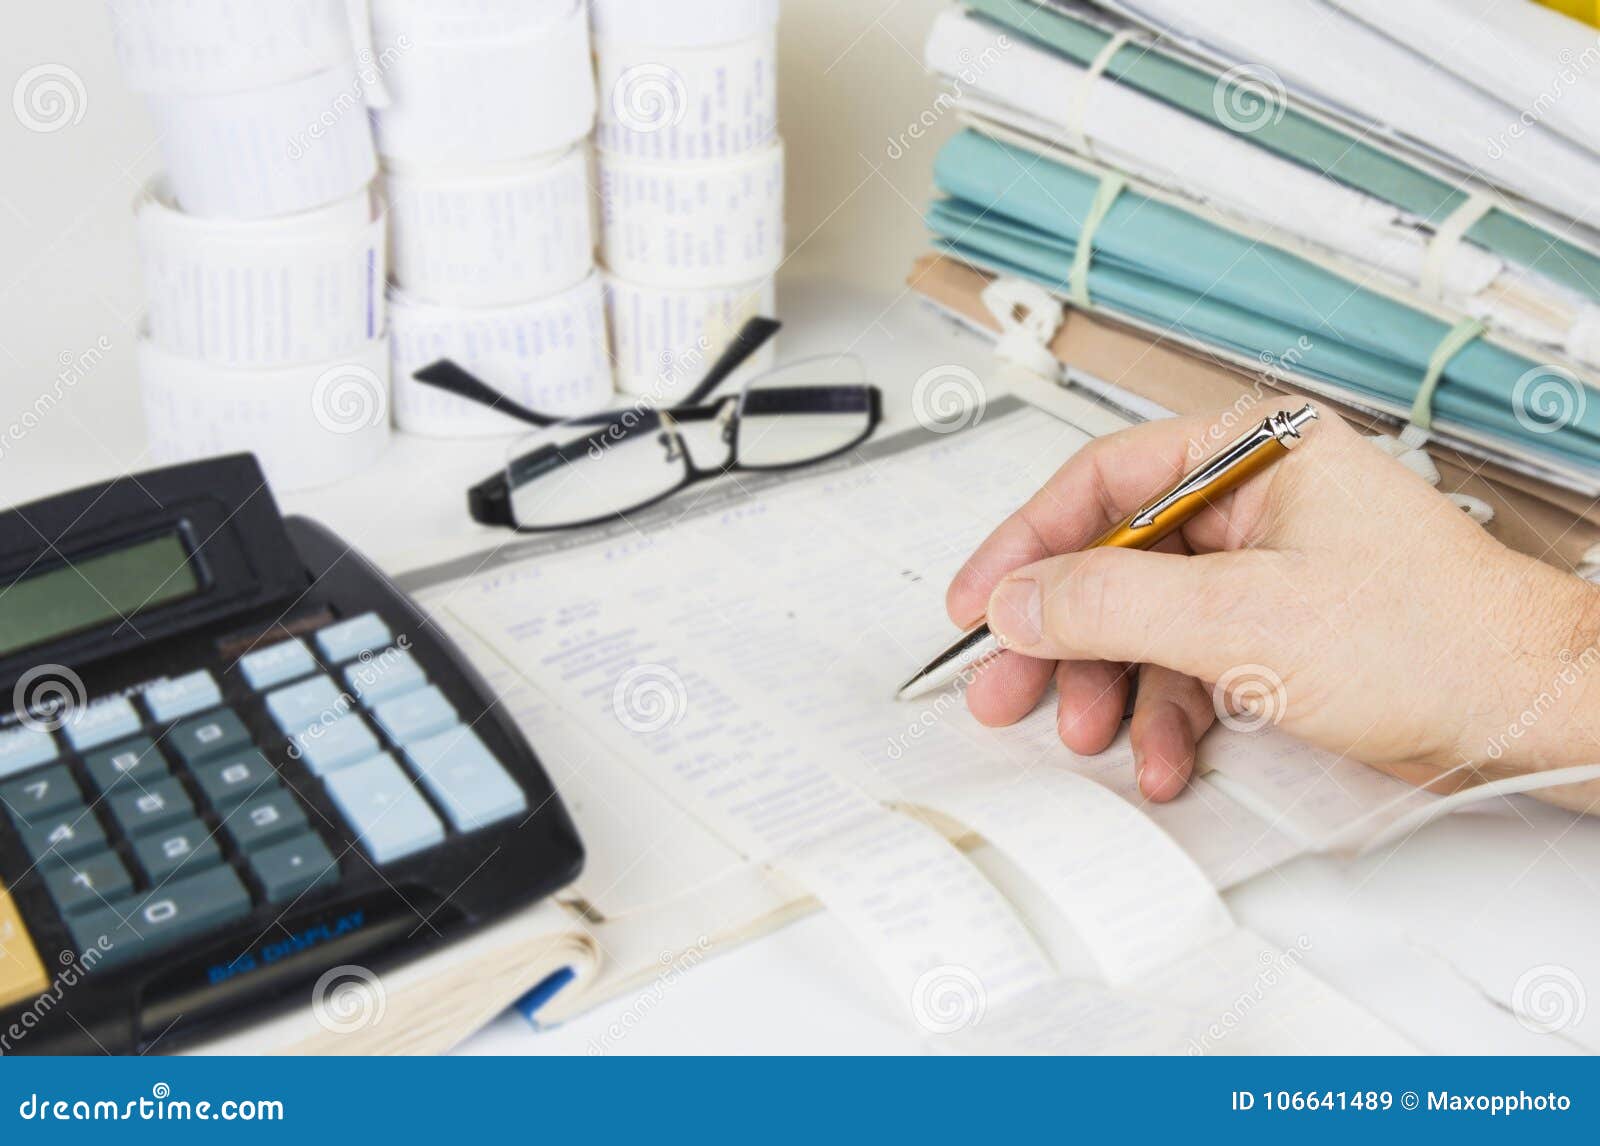 bookkeeping files and tools with eyeglasses. audit concept